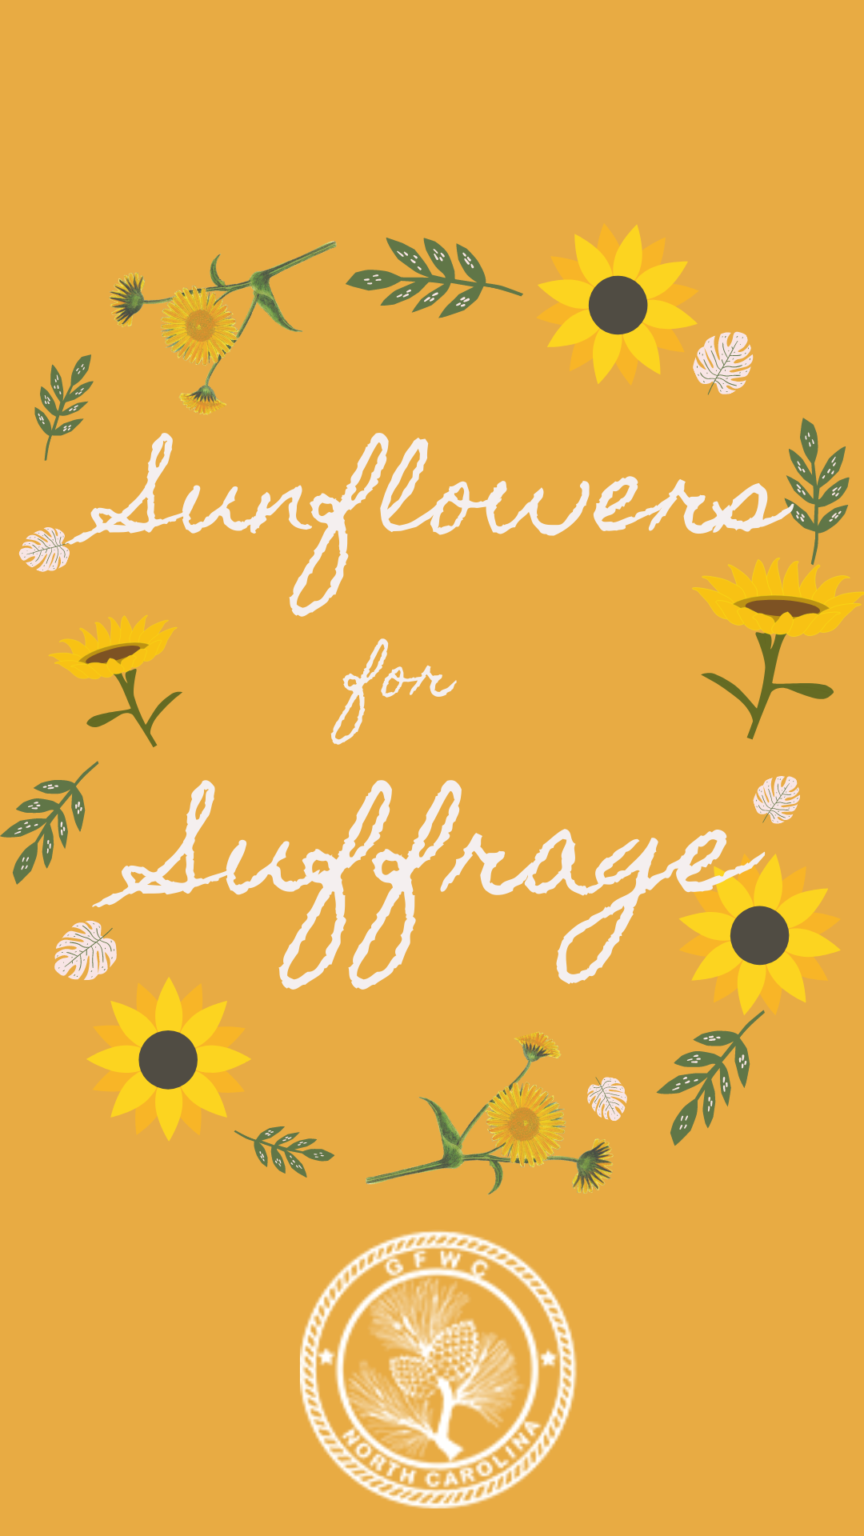 Sunflowers For Suffrage - General Federation of Women's Clubs of North ...